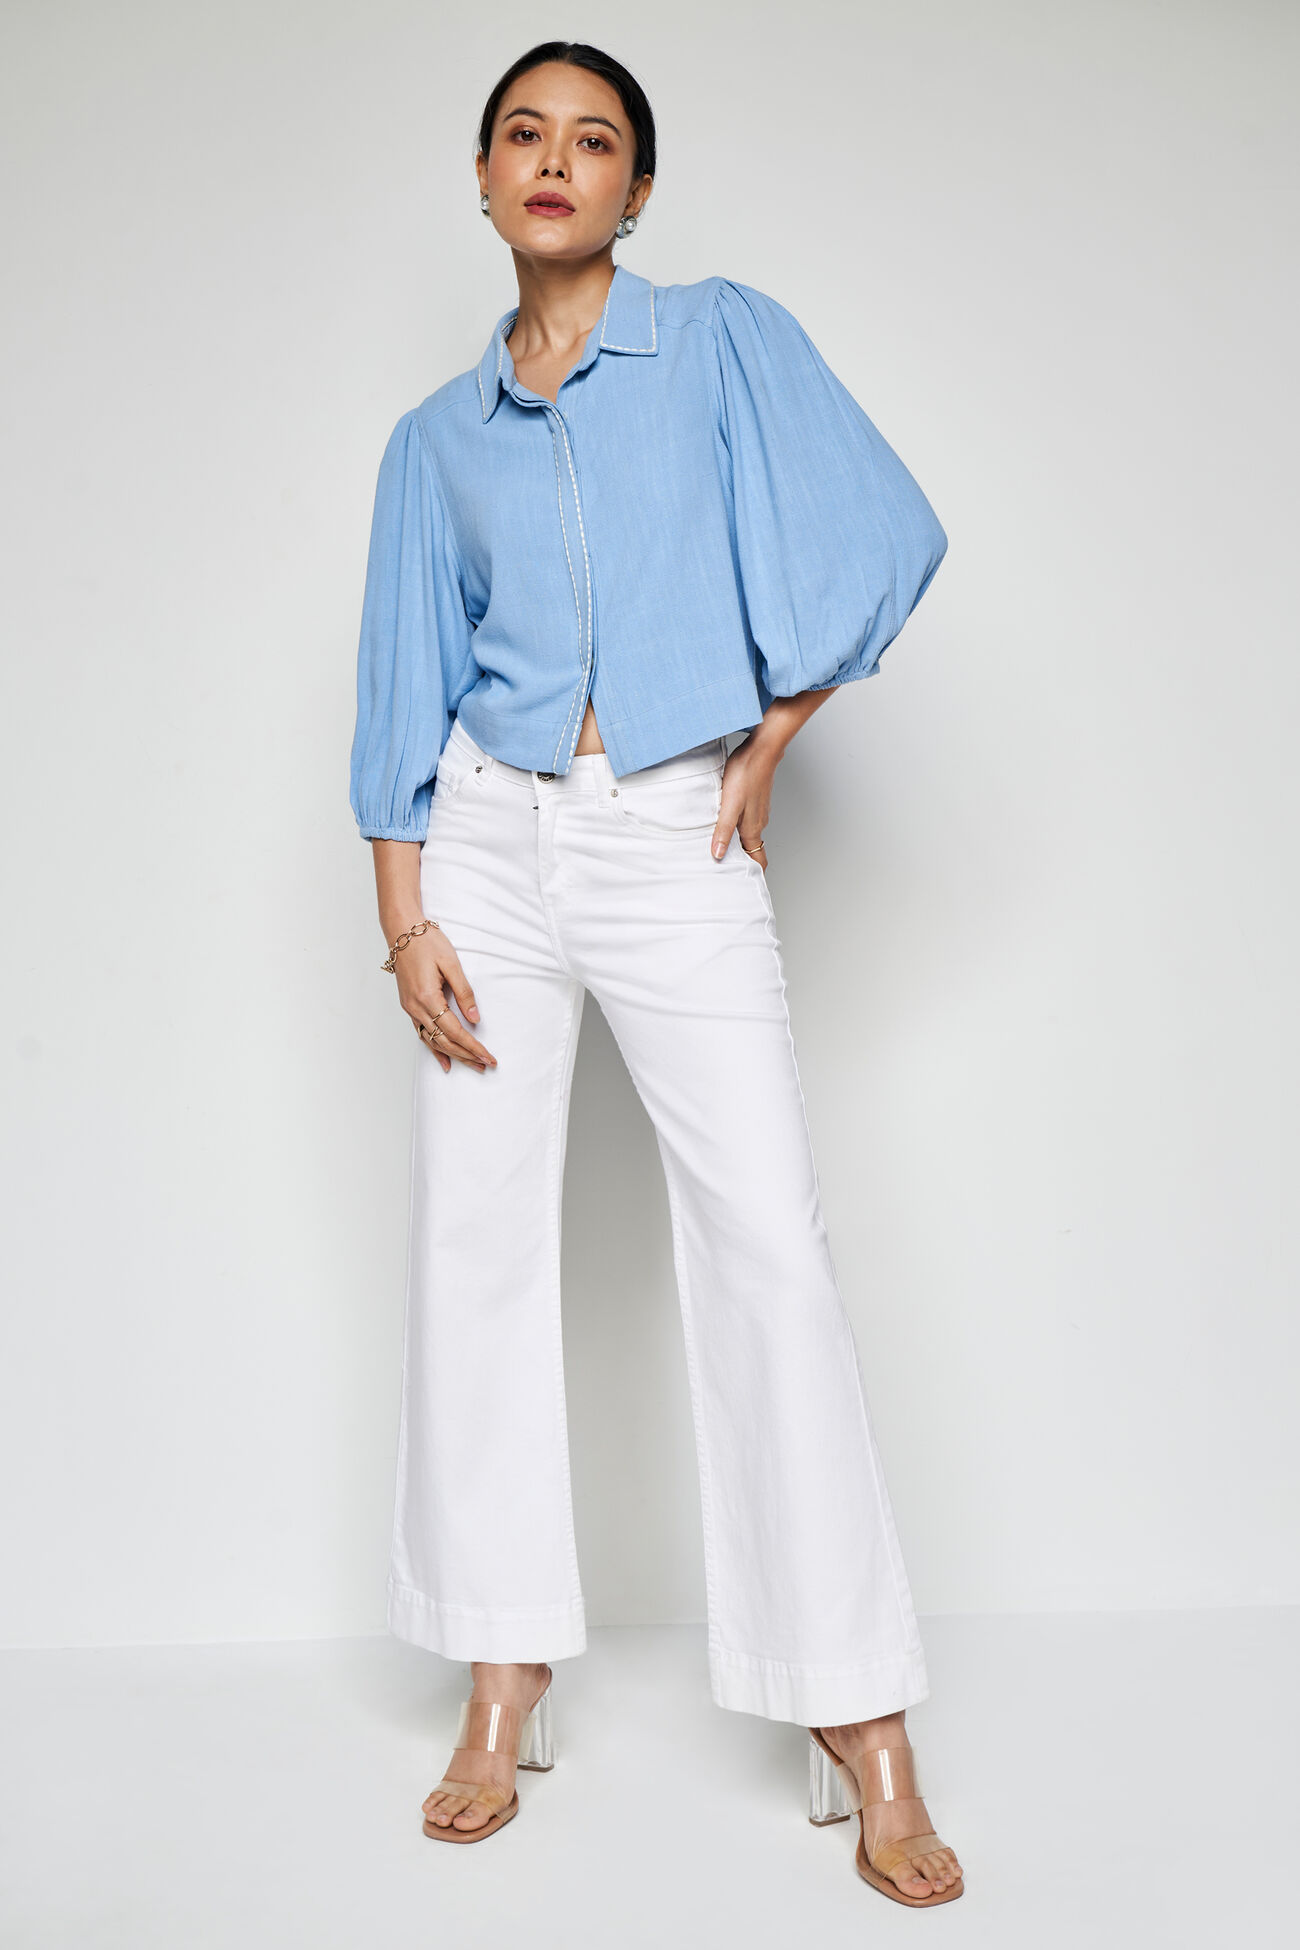 Buy our Sky Blue Top online from ANDIndia SC- F23AV165TLR